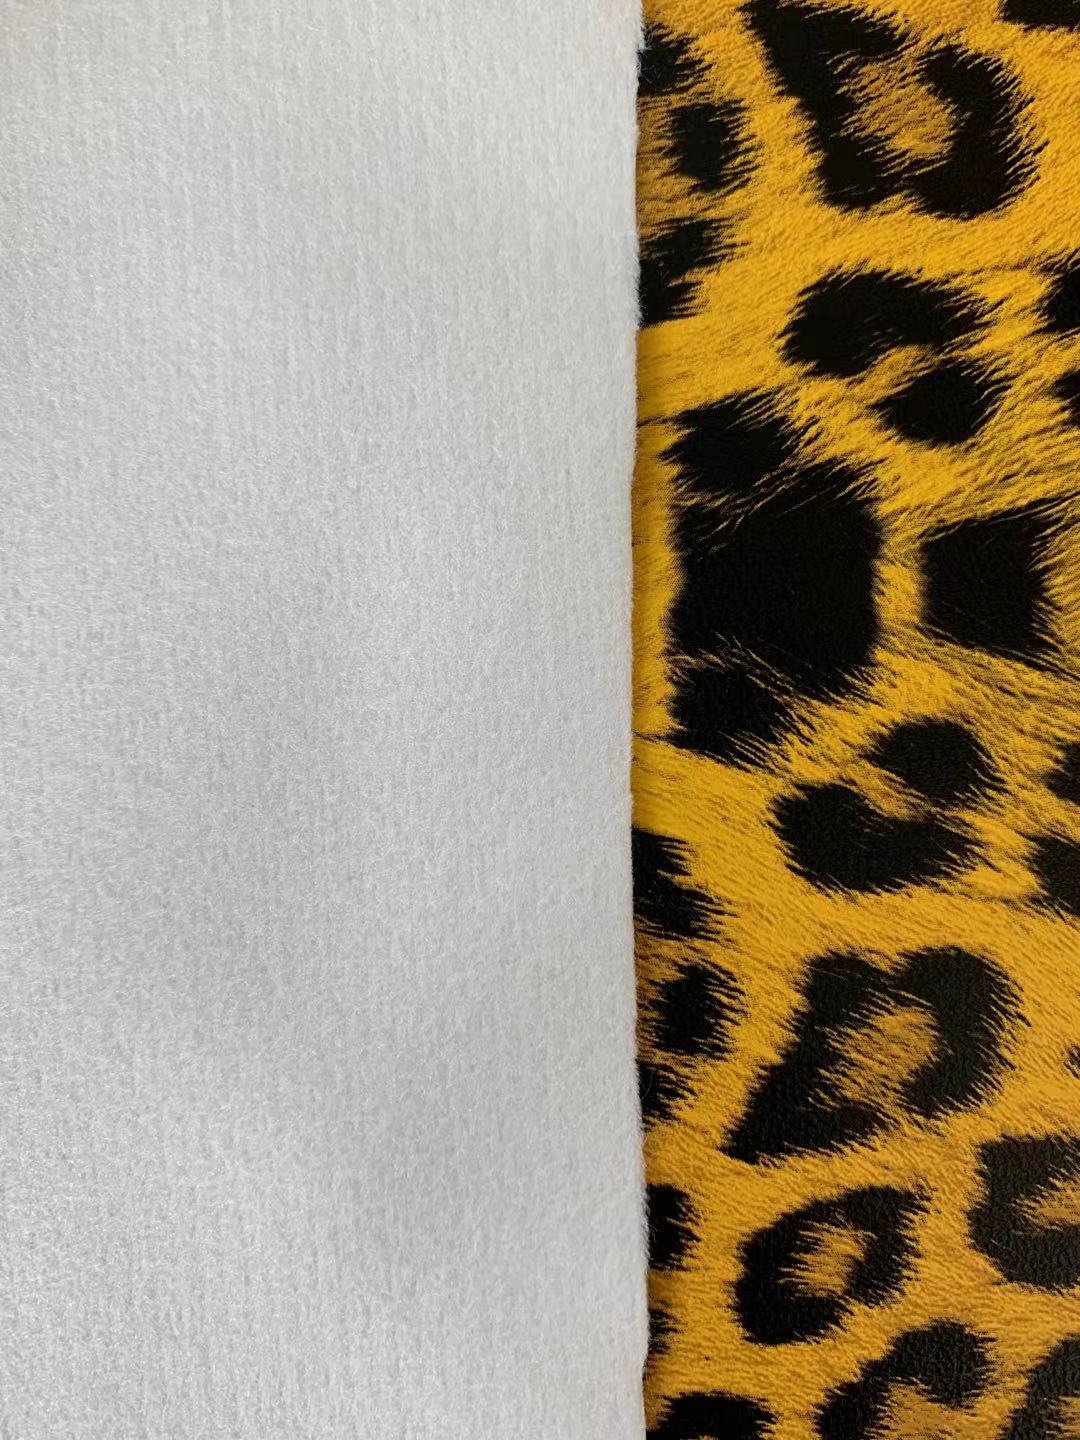 Fashion Leopard Reflective Leather Fabric For Handmade Goods(Yellow)